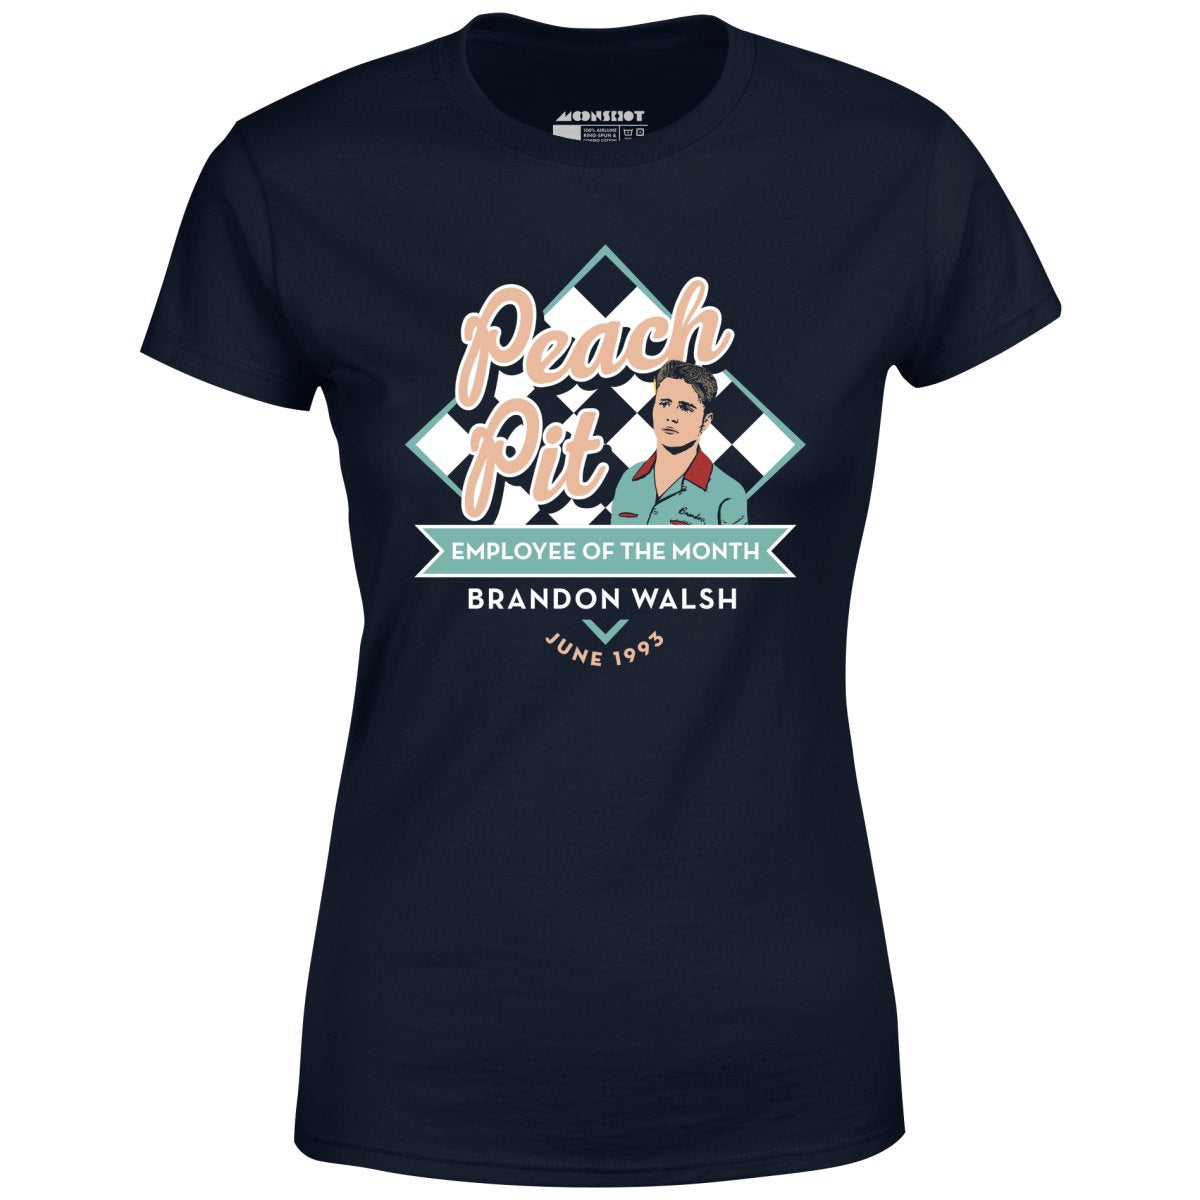 Peach Pit Employee of The Month - 90210 - Women's T-Shirt